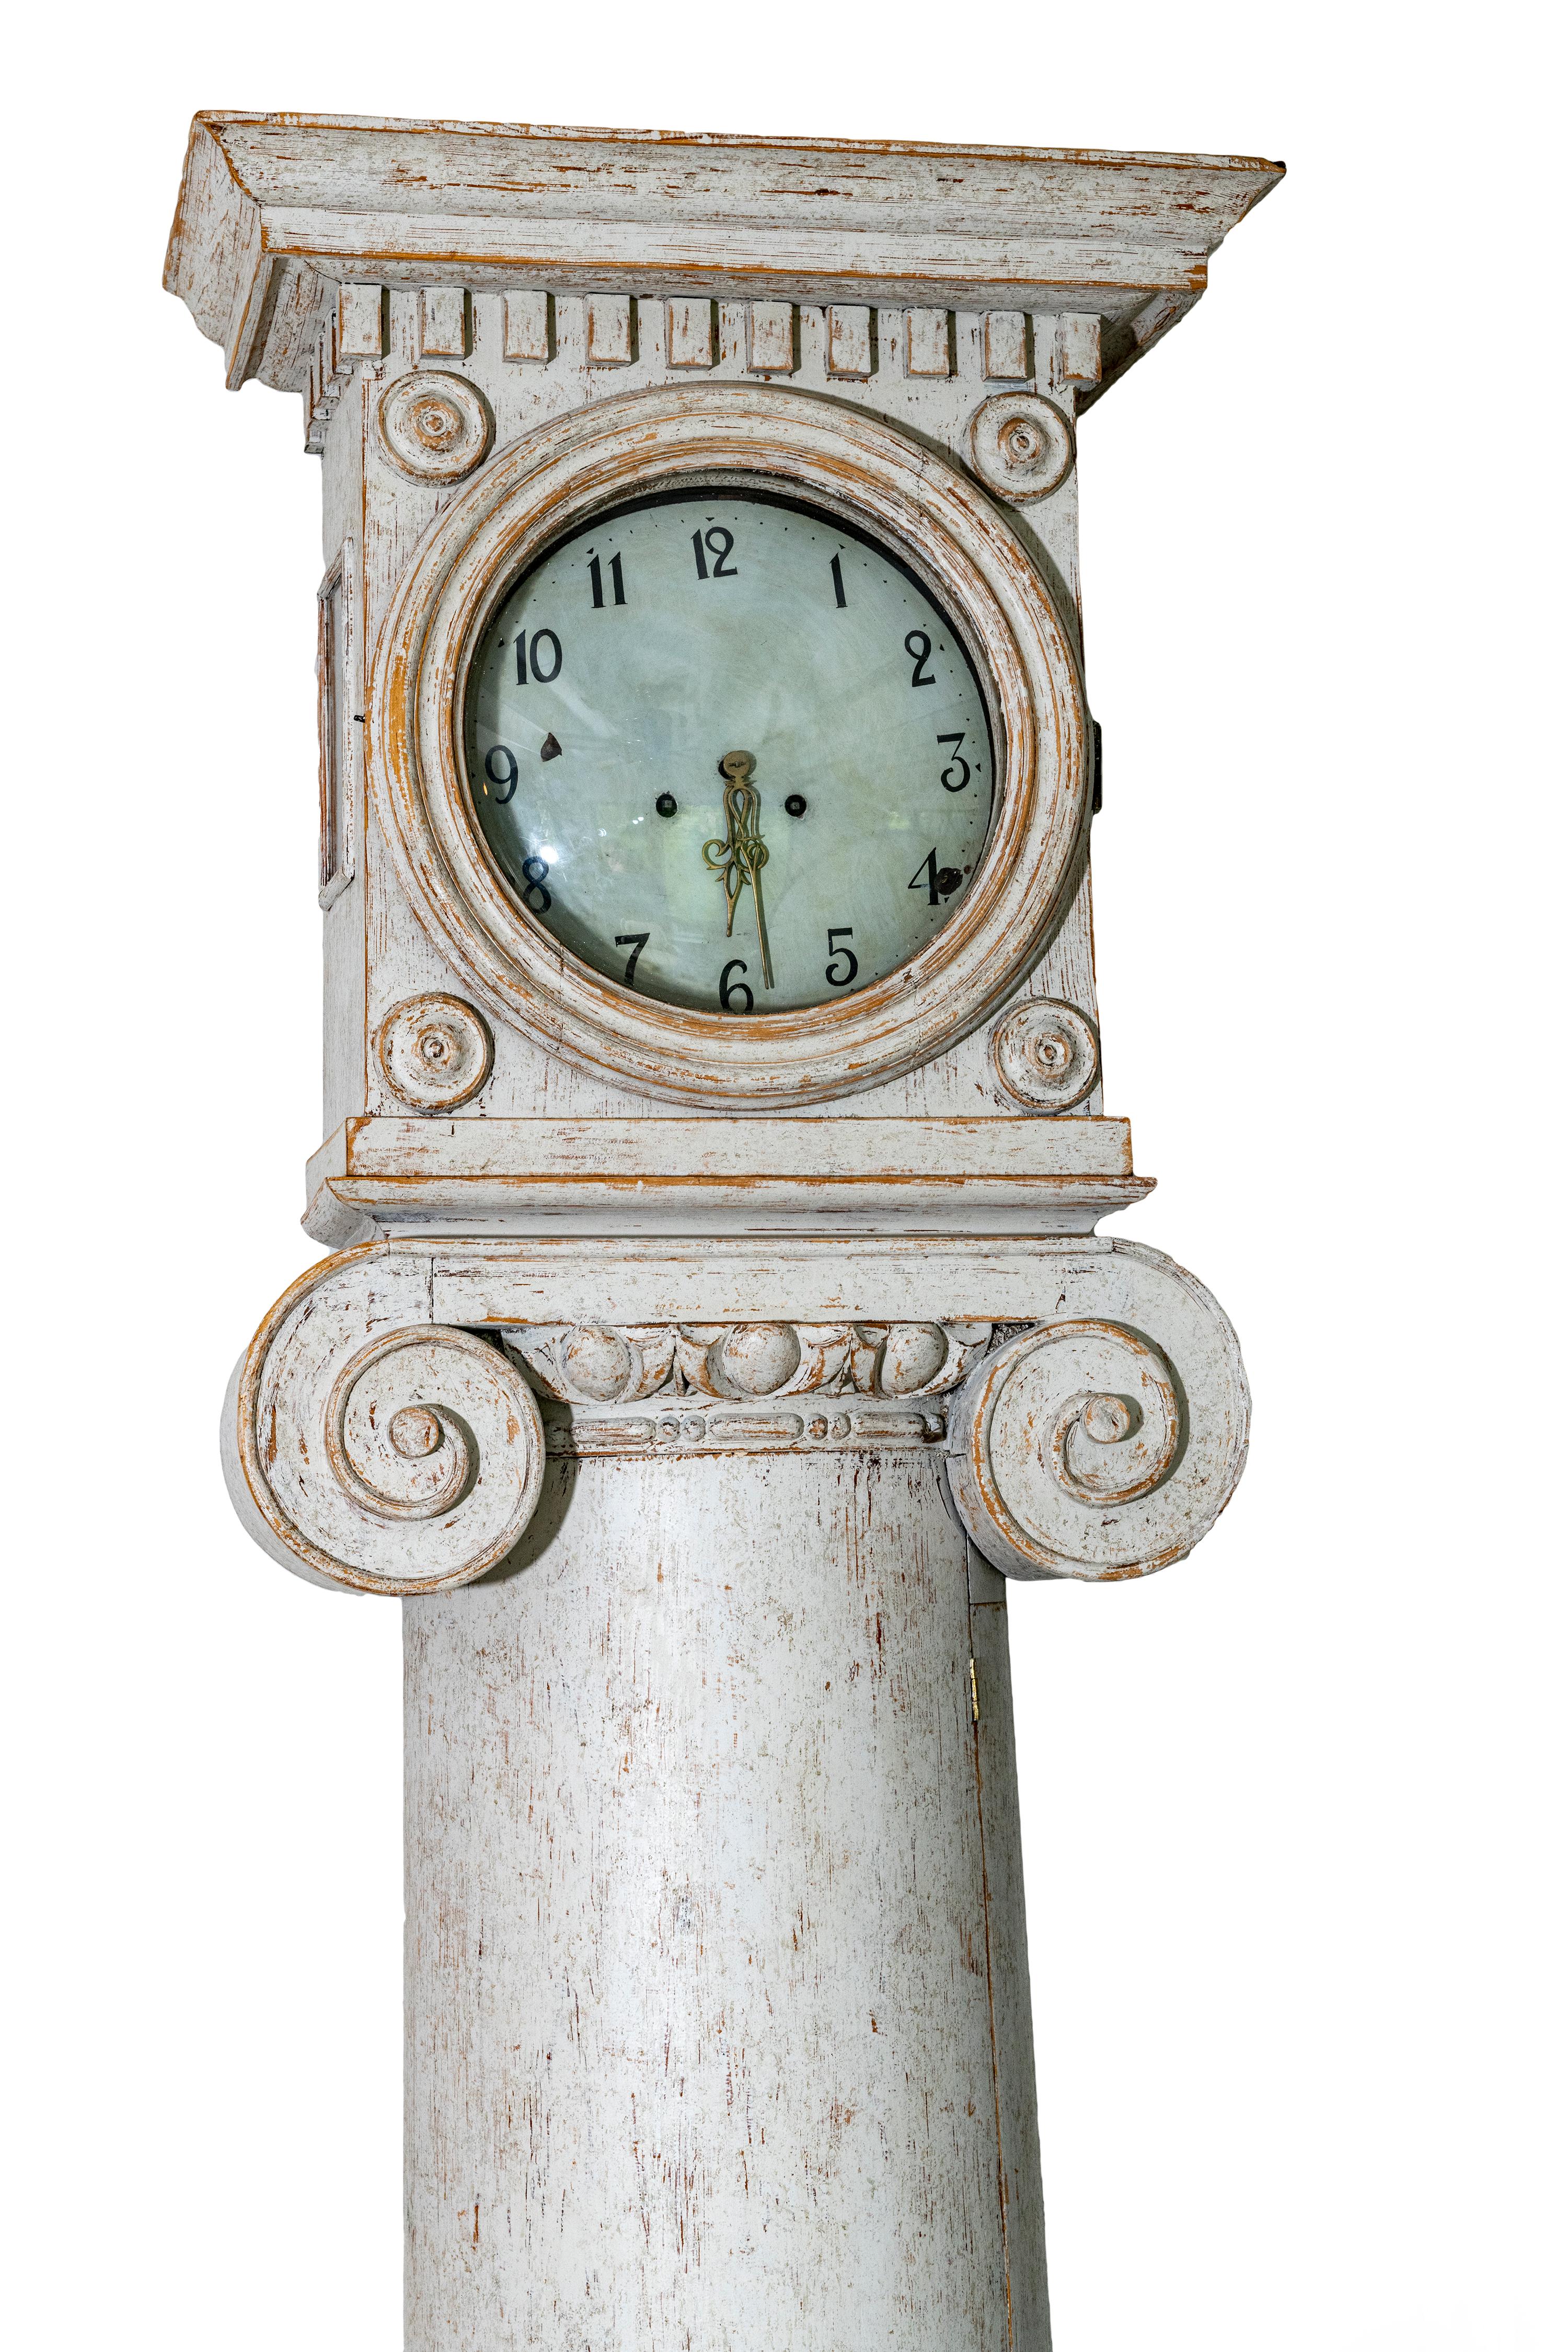 A Swedish painted tall case column clock from the late 18th century.

There are two decorative brass clock hands.

The face is secured behind a single hinged glass door. The top of the clock has a carved ionic column and carved dental